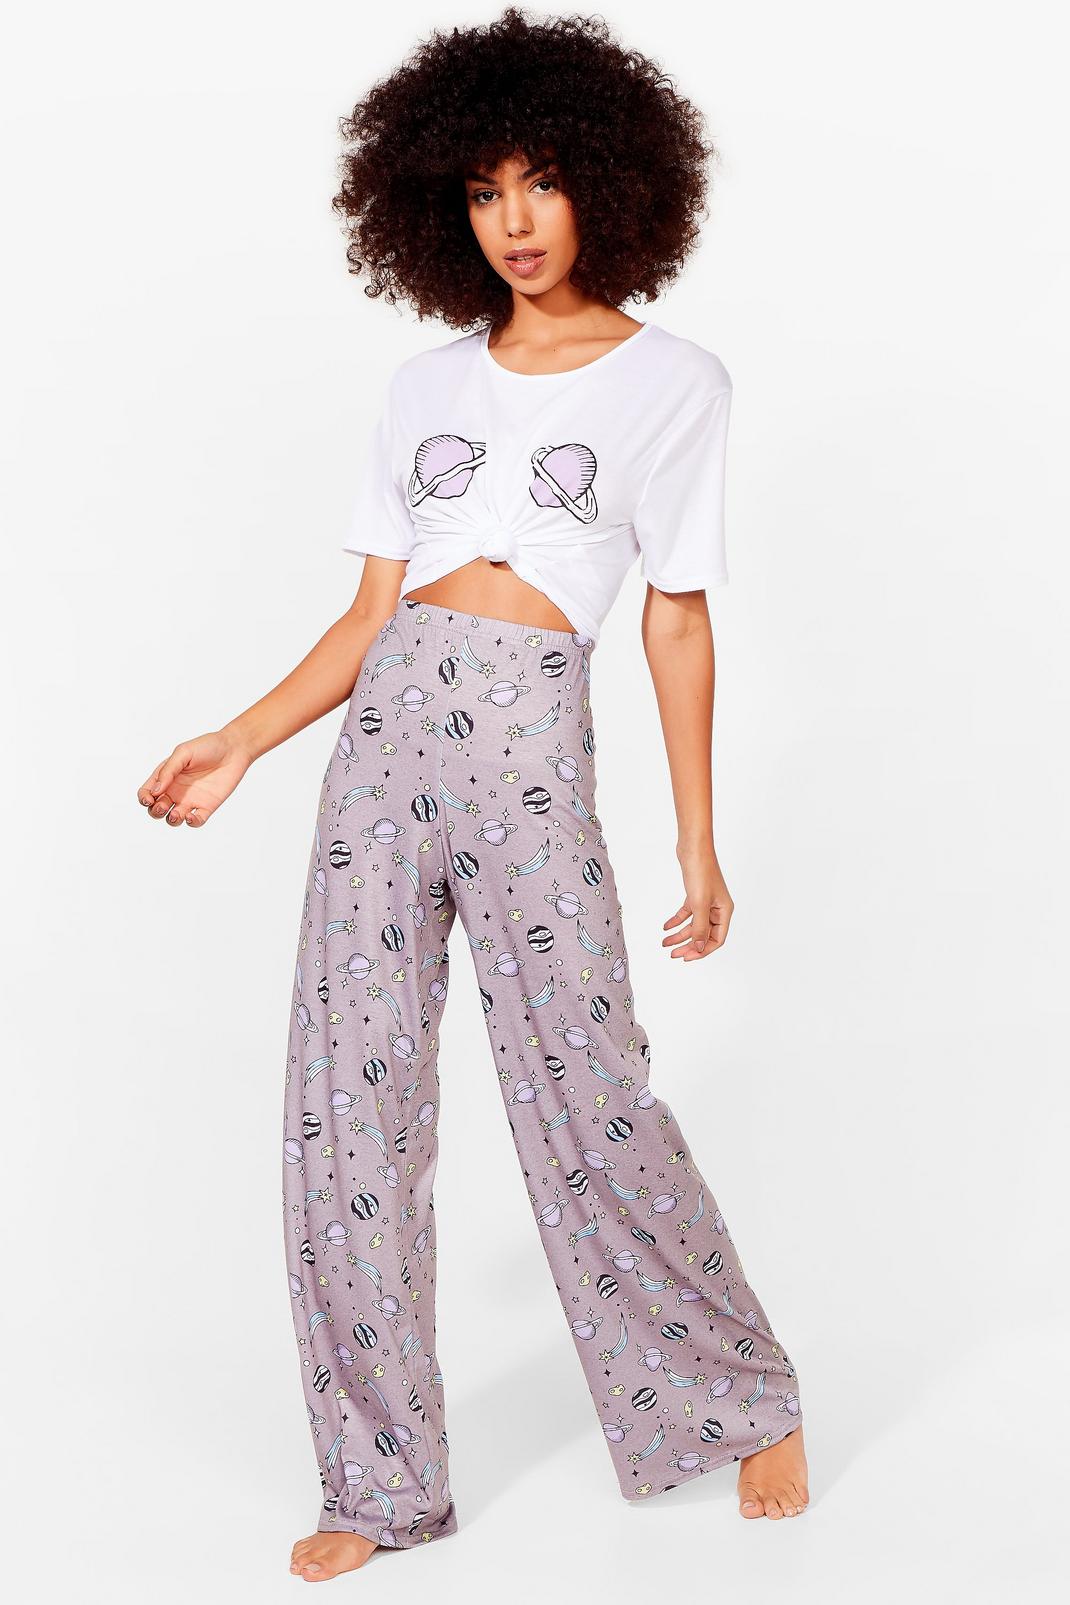 White What Planet Are You On Wide-Leg Pants Pajama Set image number 1